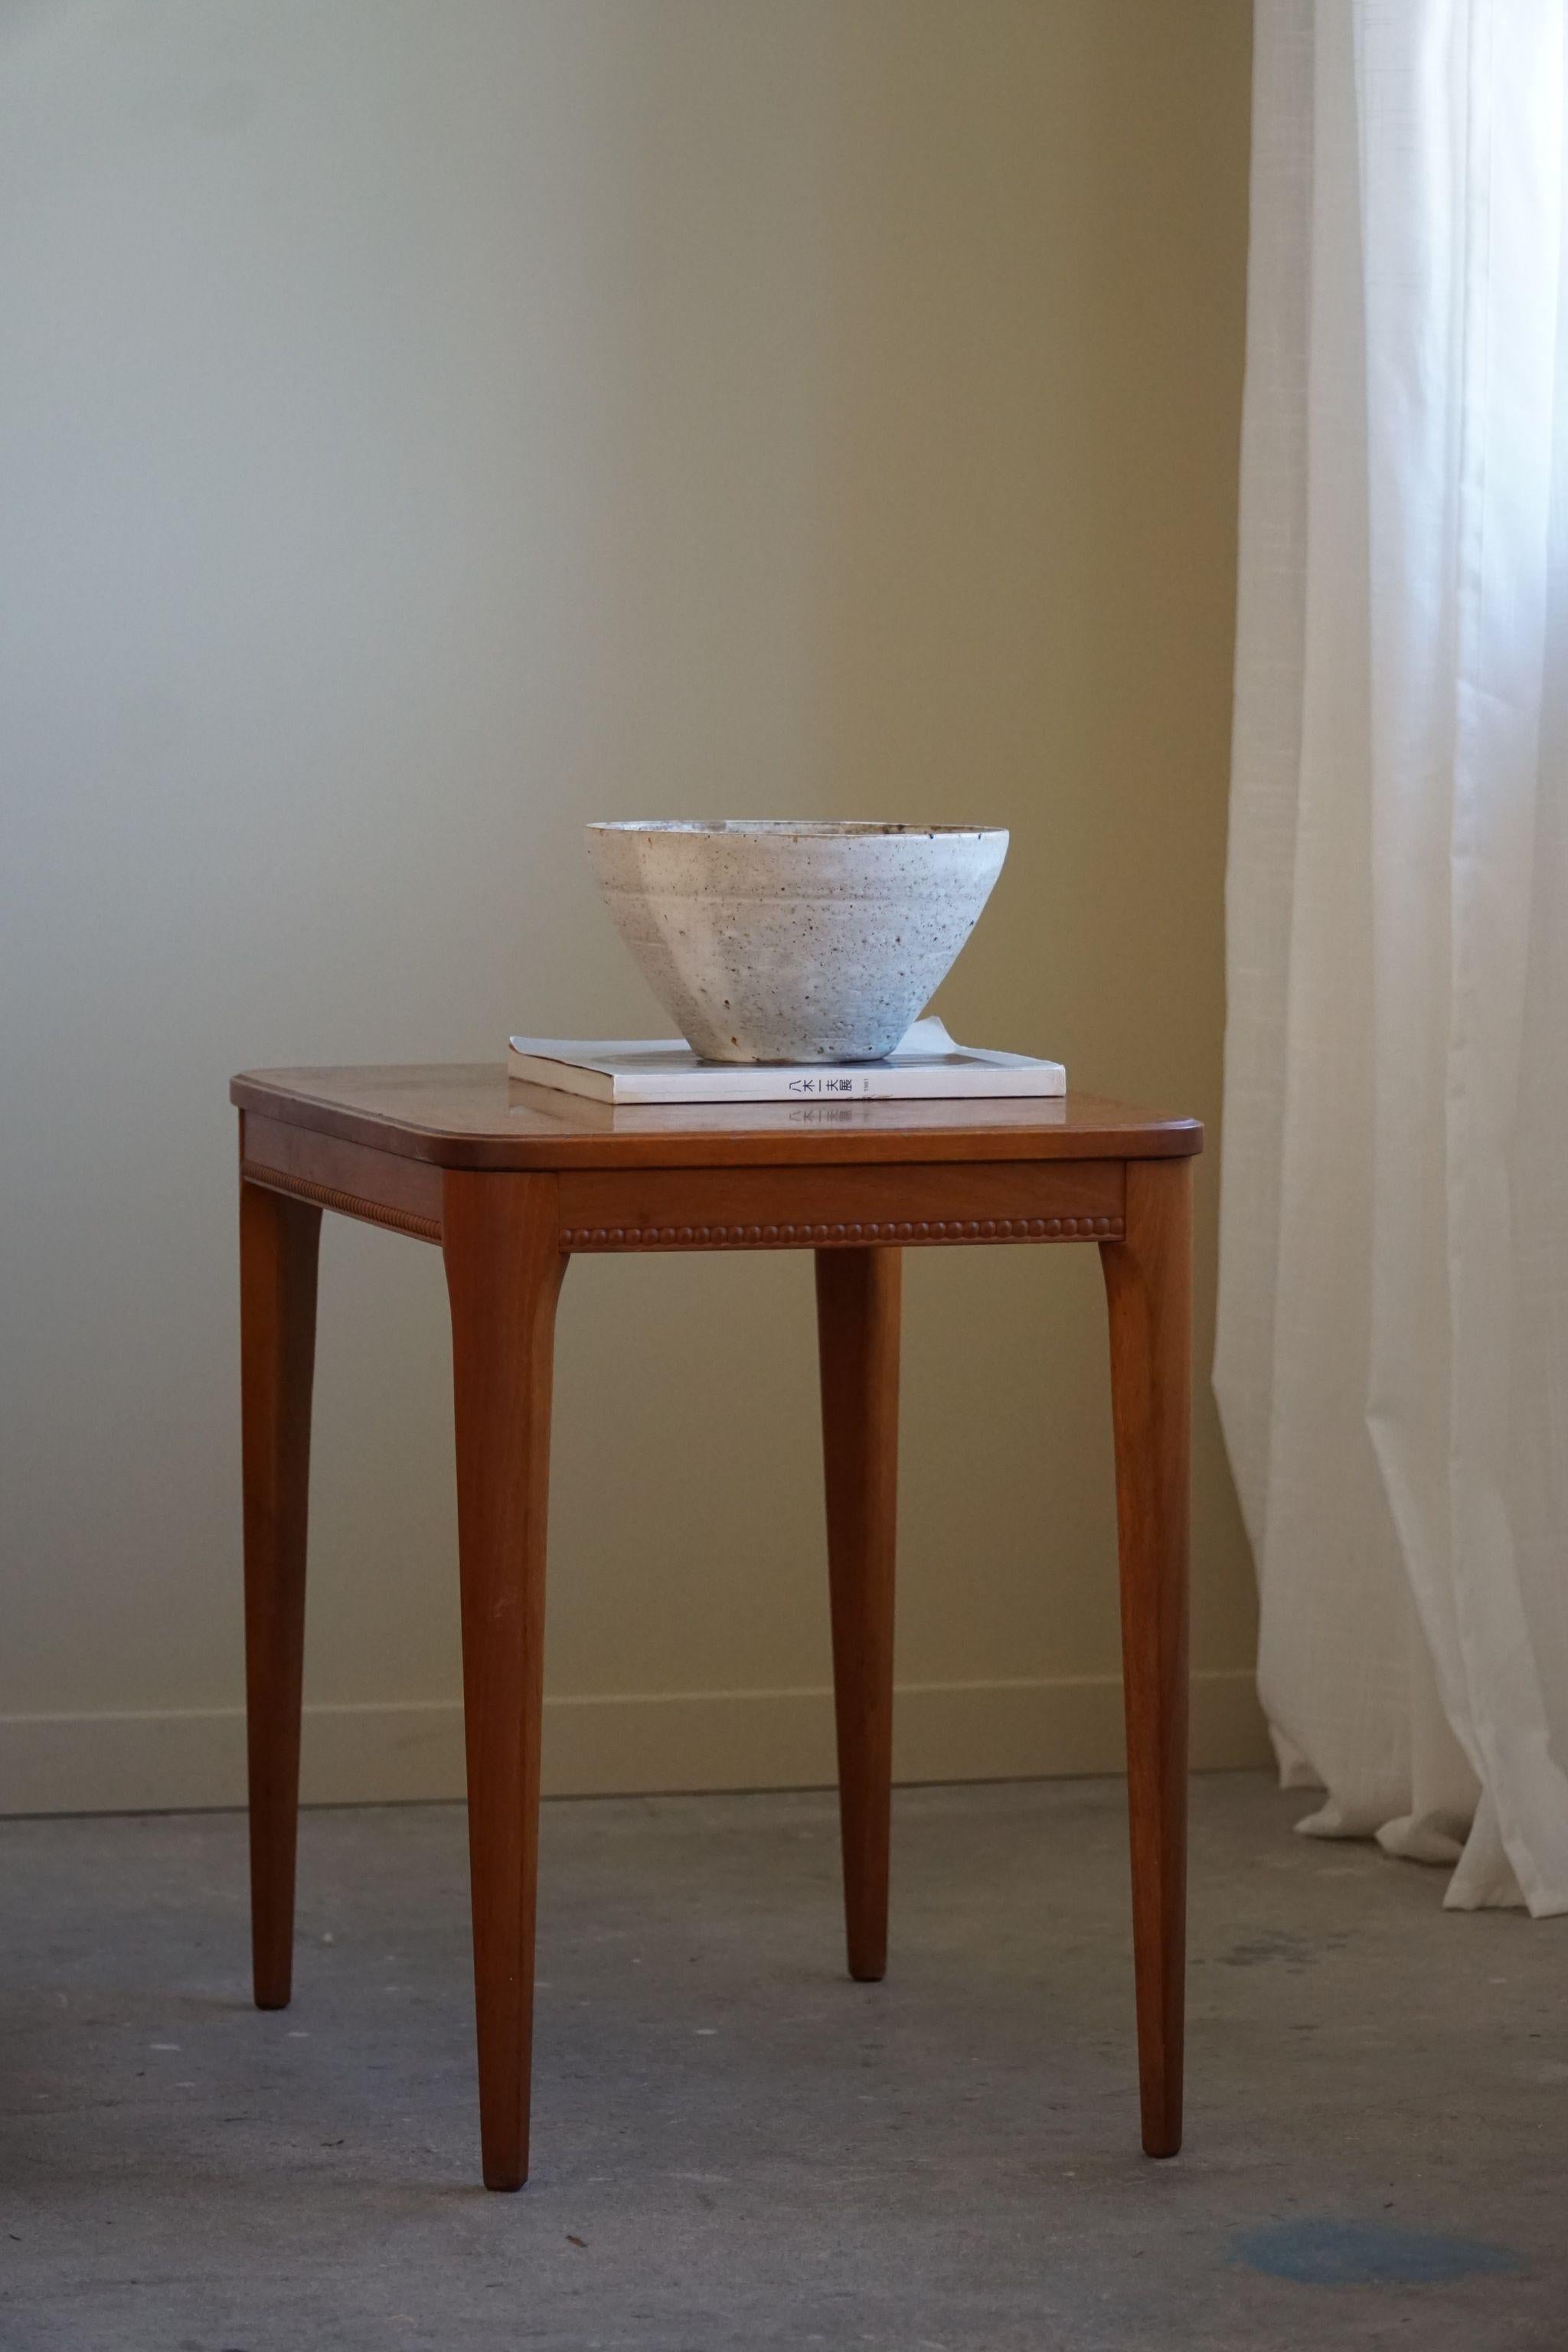 Side table in teak with decorative globes around the edge. Made by a skilled Danish cabinetmaker in the 1950s. This timeless classic table will complement many interior styles. A modern, bohemian, classic, Scandinavian or an Art Deco home